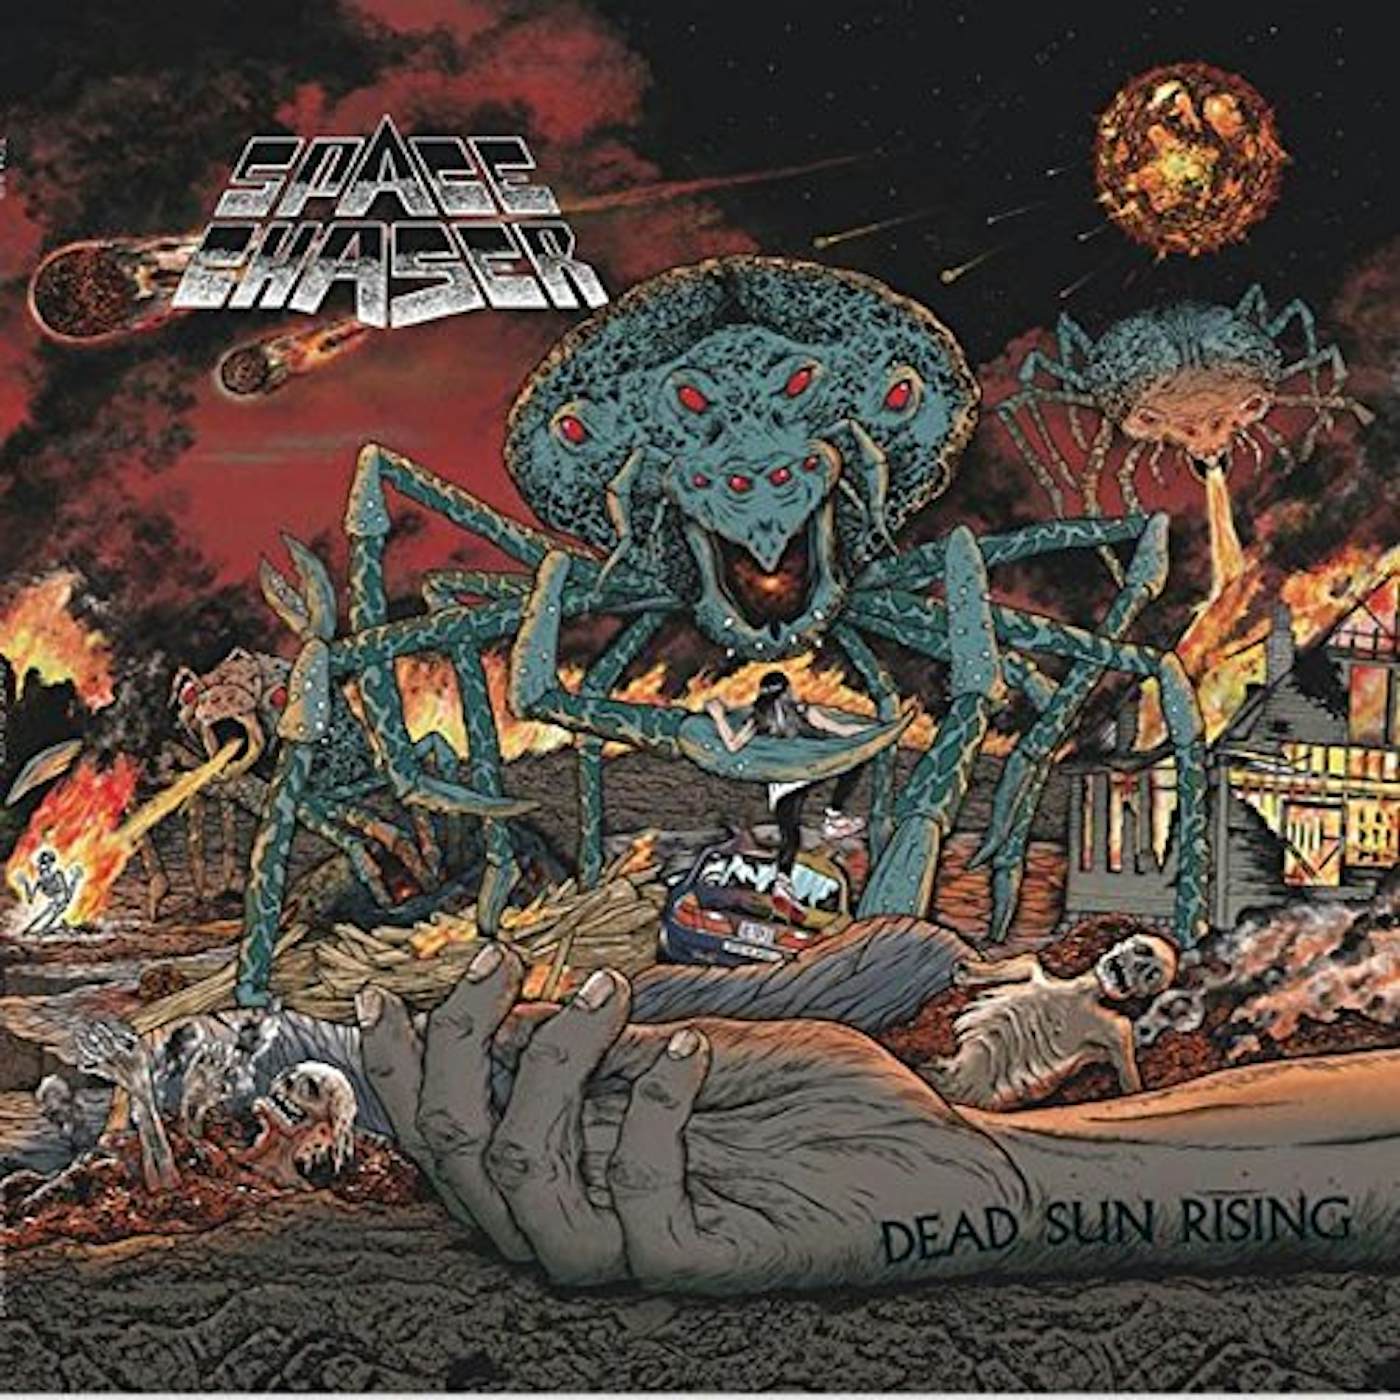 Space Chaser DEAD SUN RISING CD